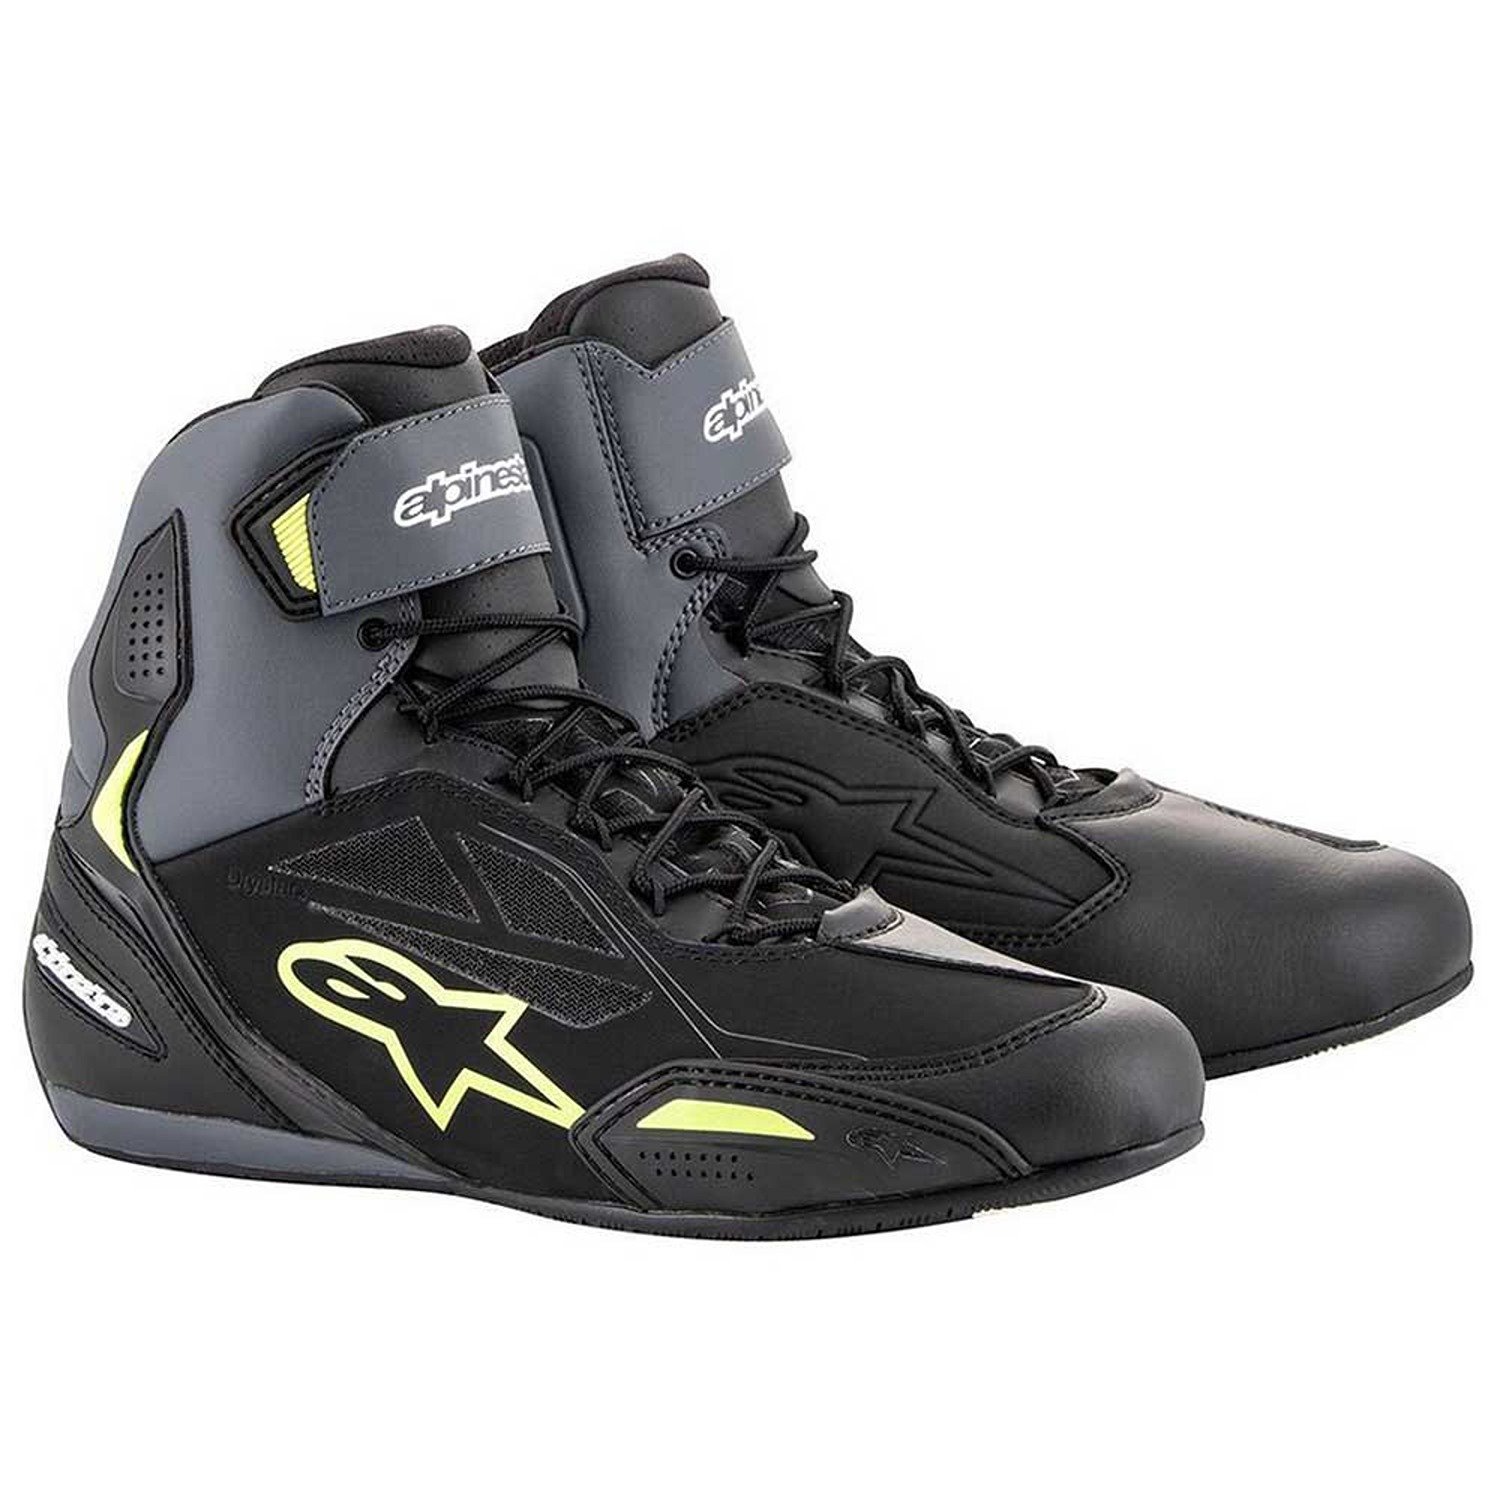 Image of Alpinestars Faster-3 Shoes Black Yellow Fluo Size US 95 ID 8059347331096